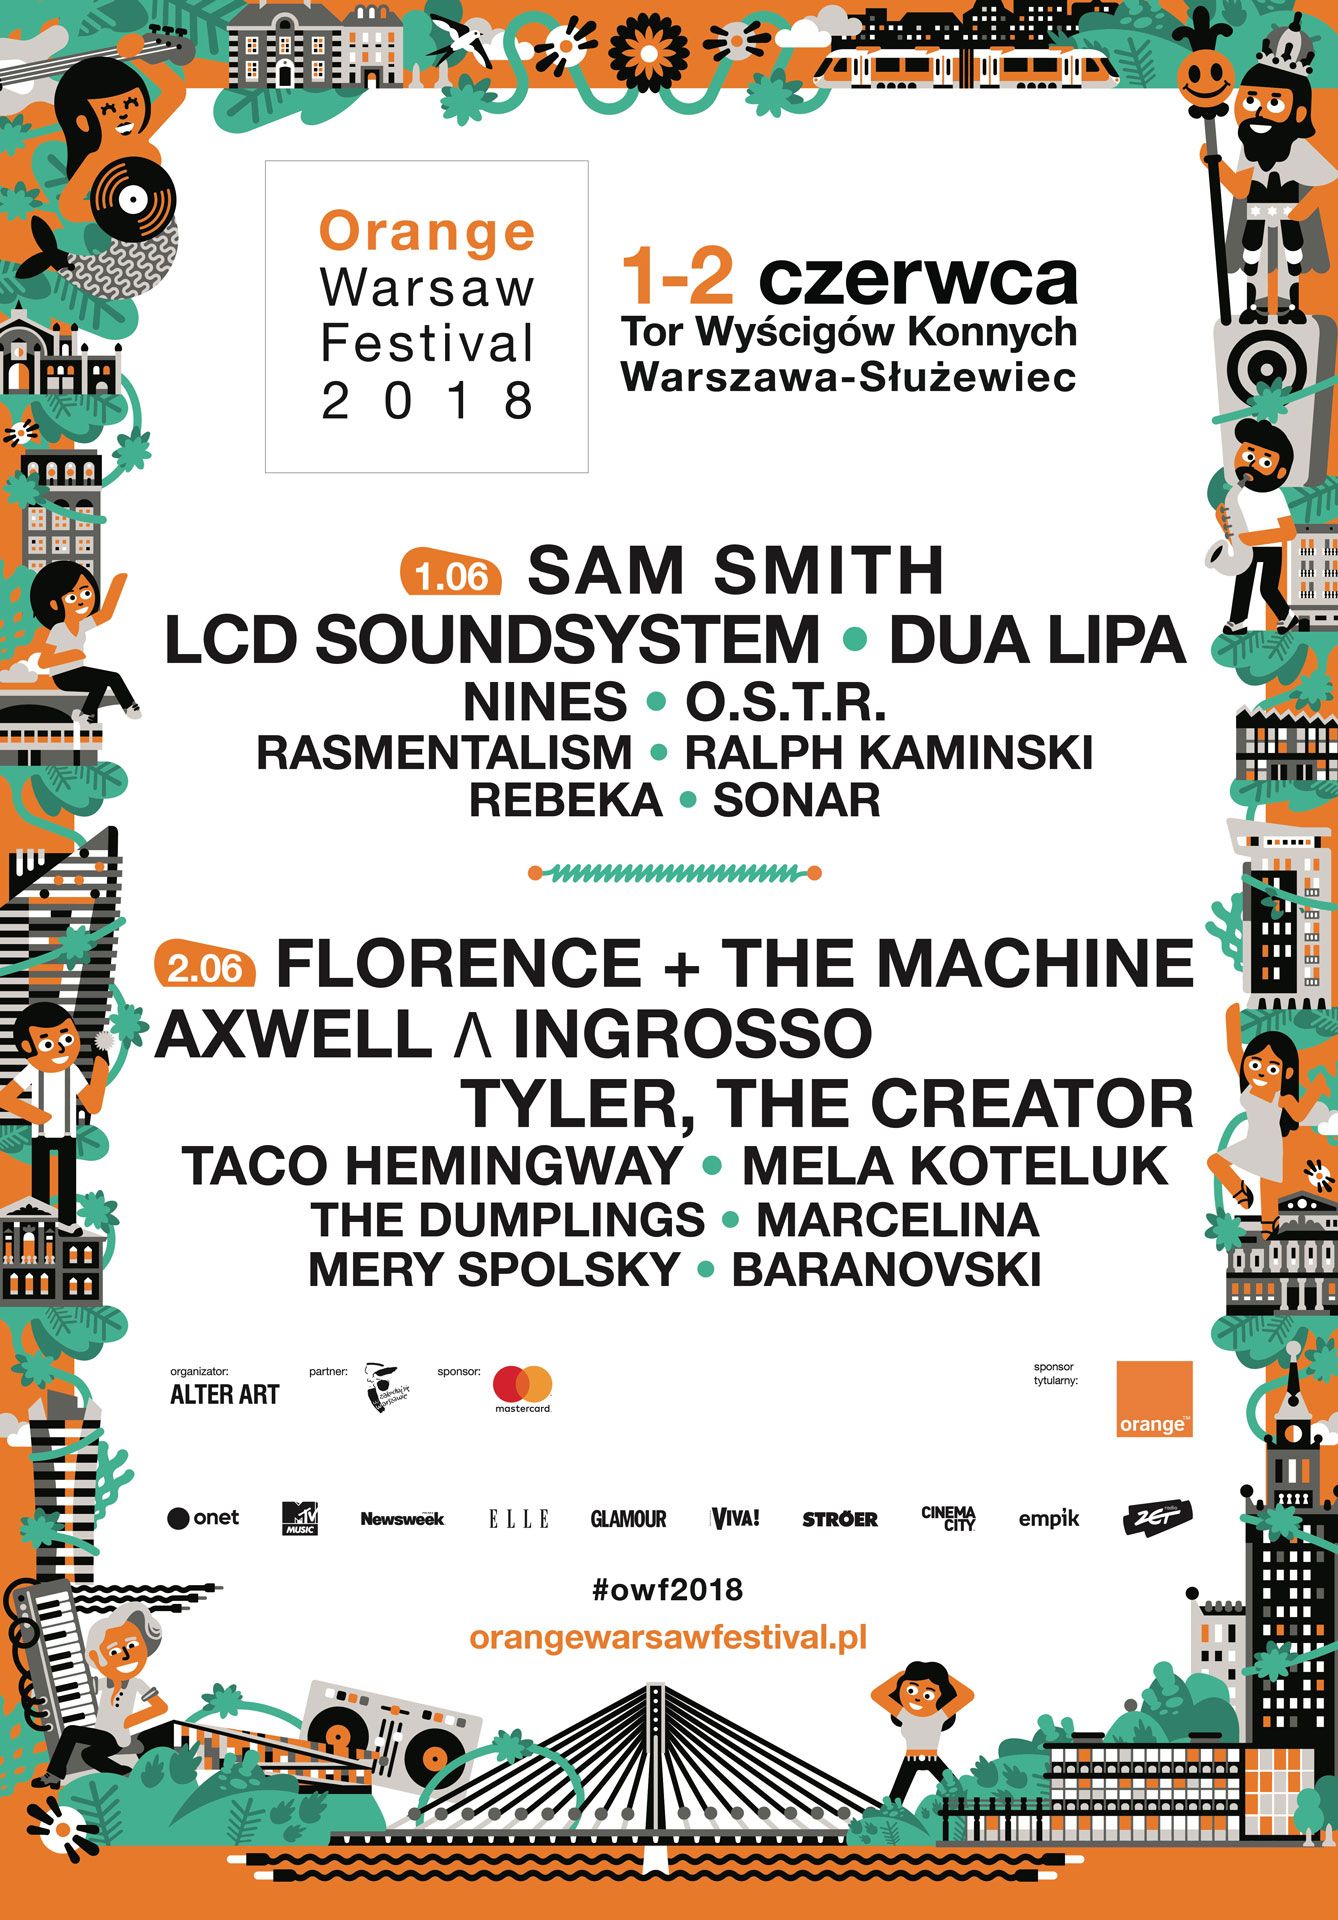 2018 line-up: Sam Smith, Florence and the Machine, LCD Soundsystem, Dua Lipa, Tyler, The Creator, Taco Hemingway and more